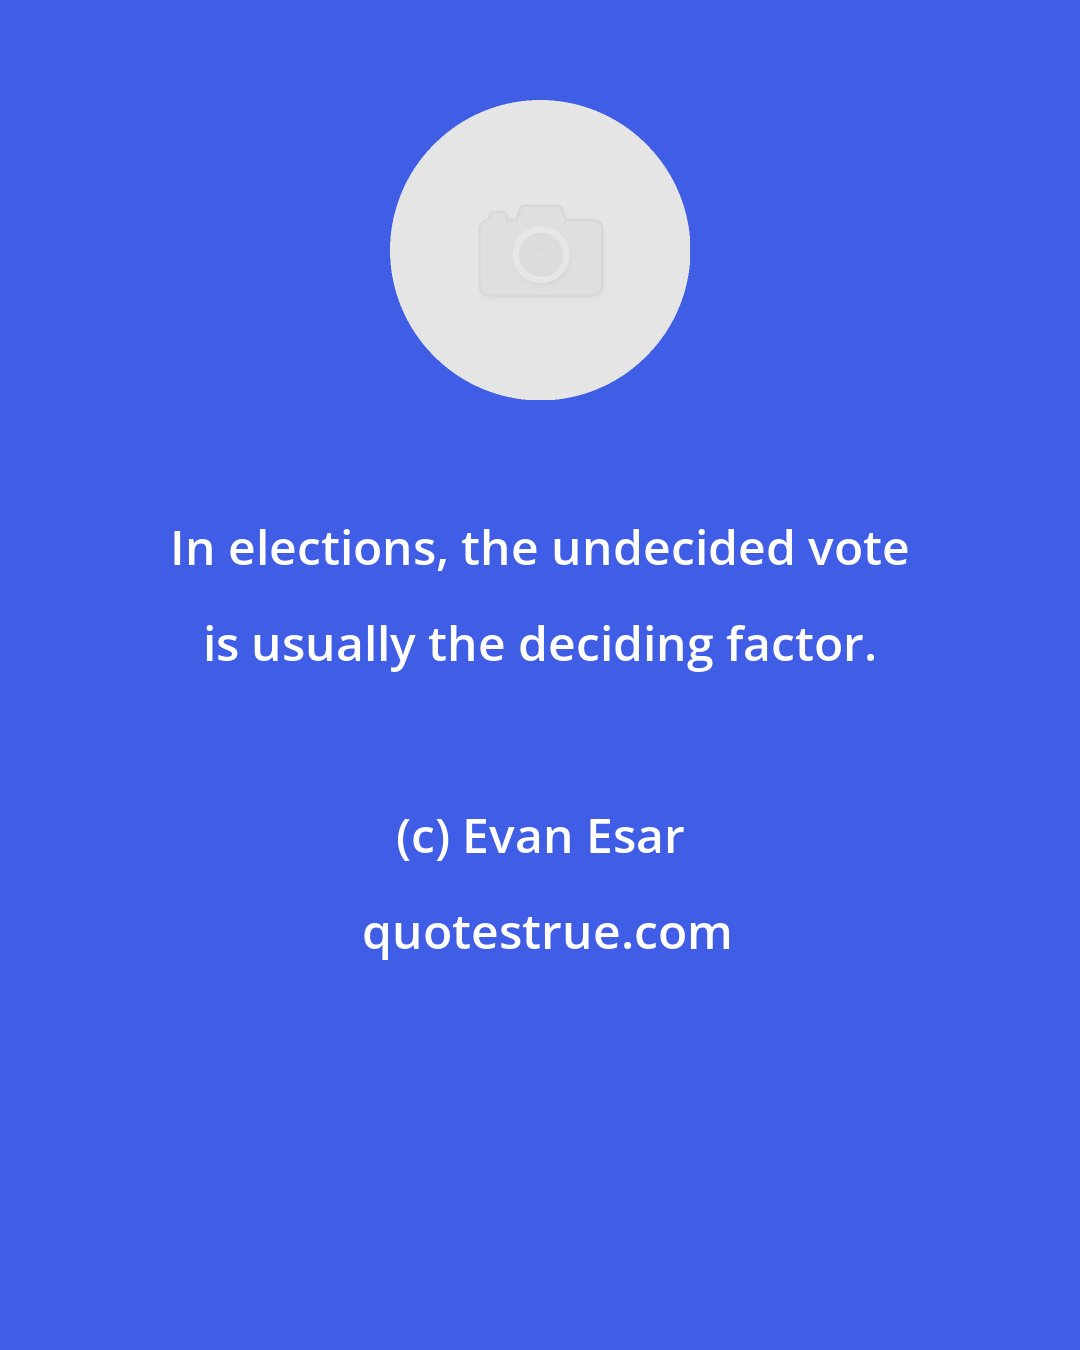 Evan Esar: In elections, the undecided vote is usually the deciding factor.